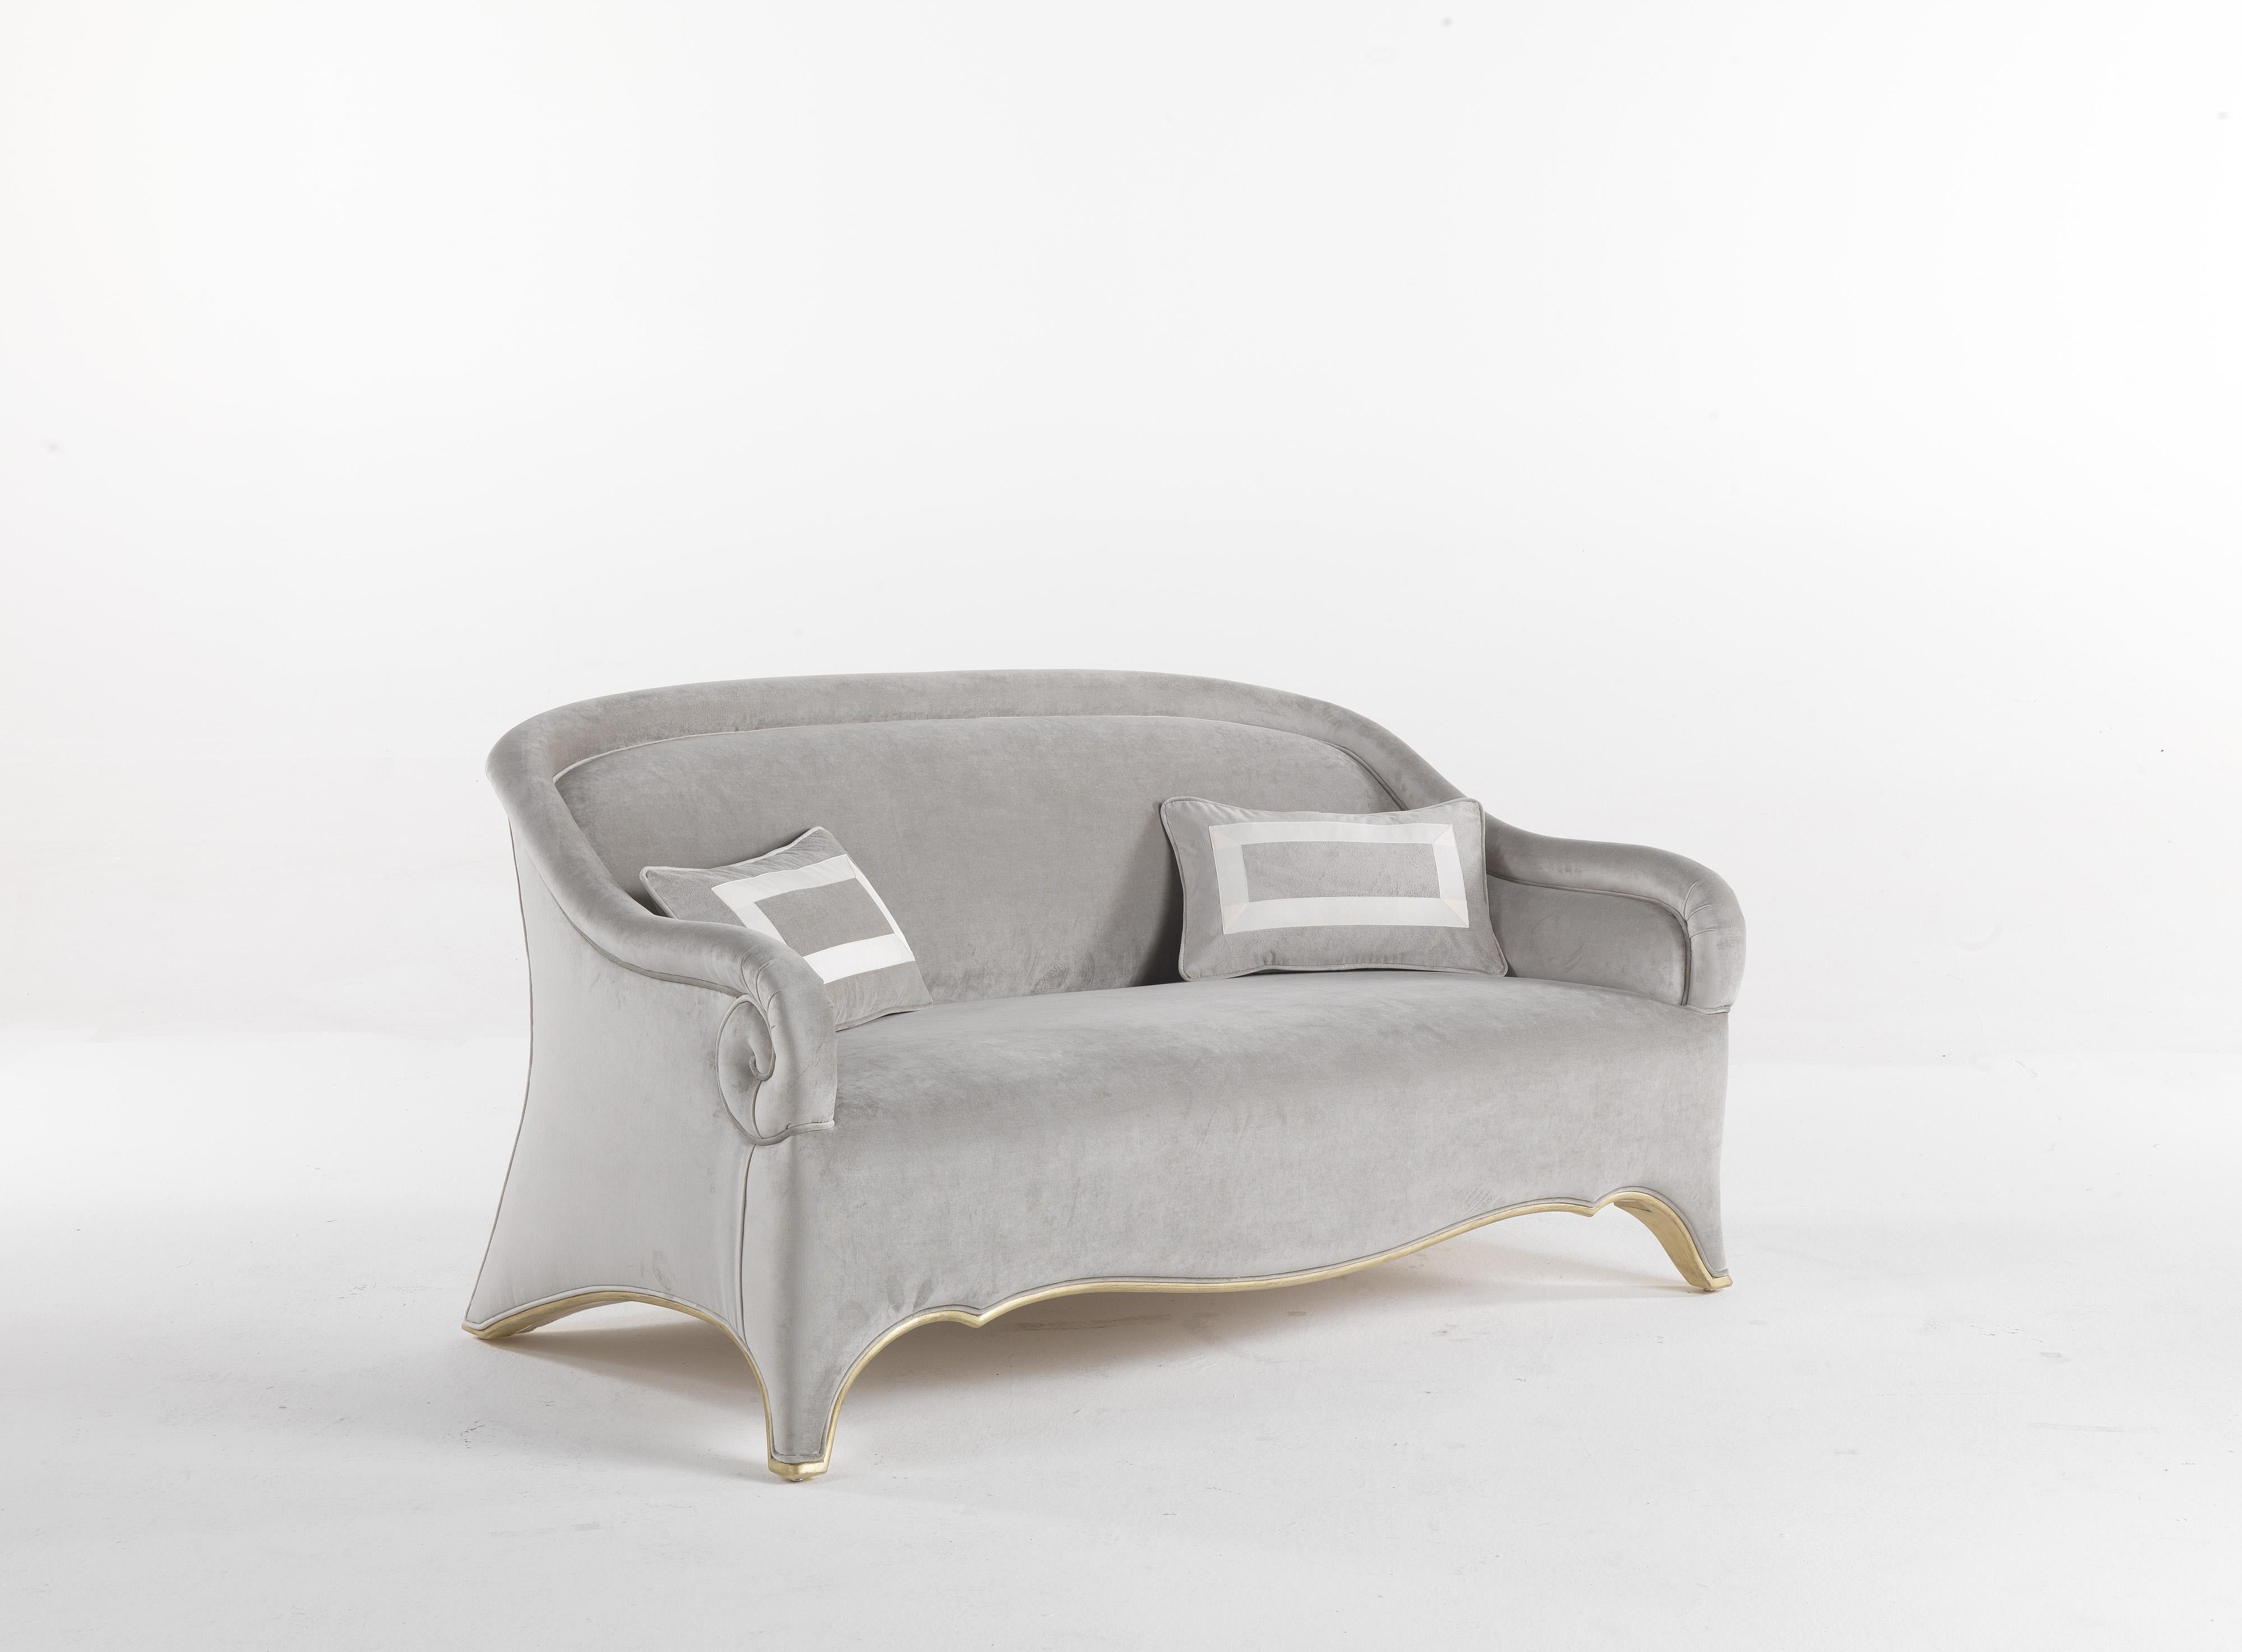 Soft lines and timeless design for the Pegaso sofa. The curvy shape guarantees maximum comfort, and the upholstery in the softest fabric offers a sensory pleasure to the touch. Luxury at its finest. 
Pegaso 2-seater sofa with structure in beechwood